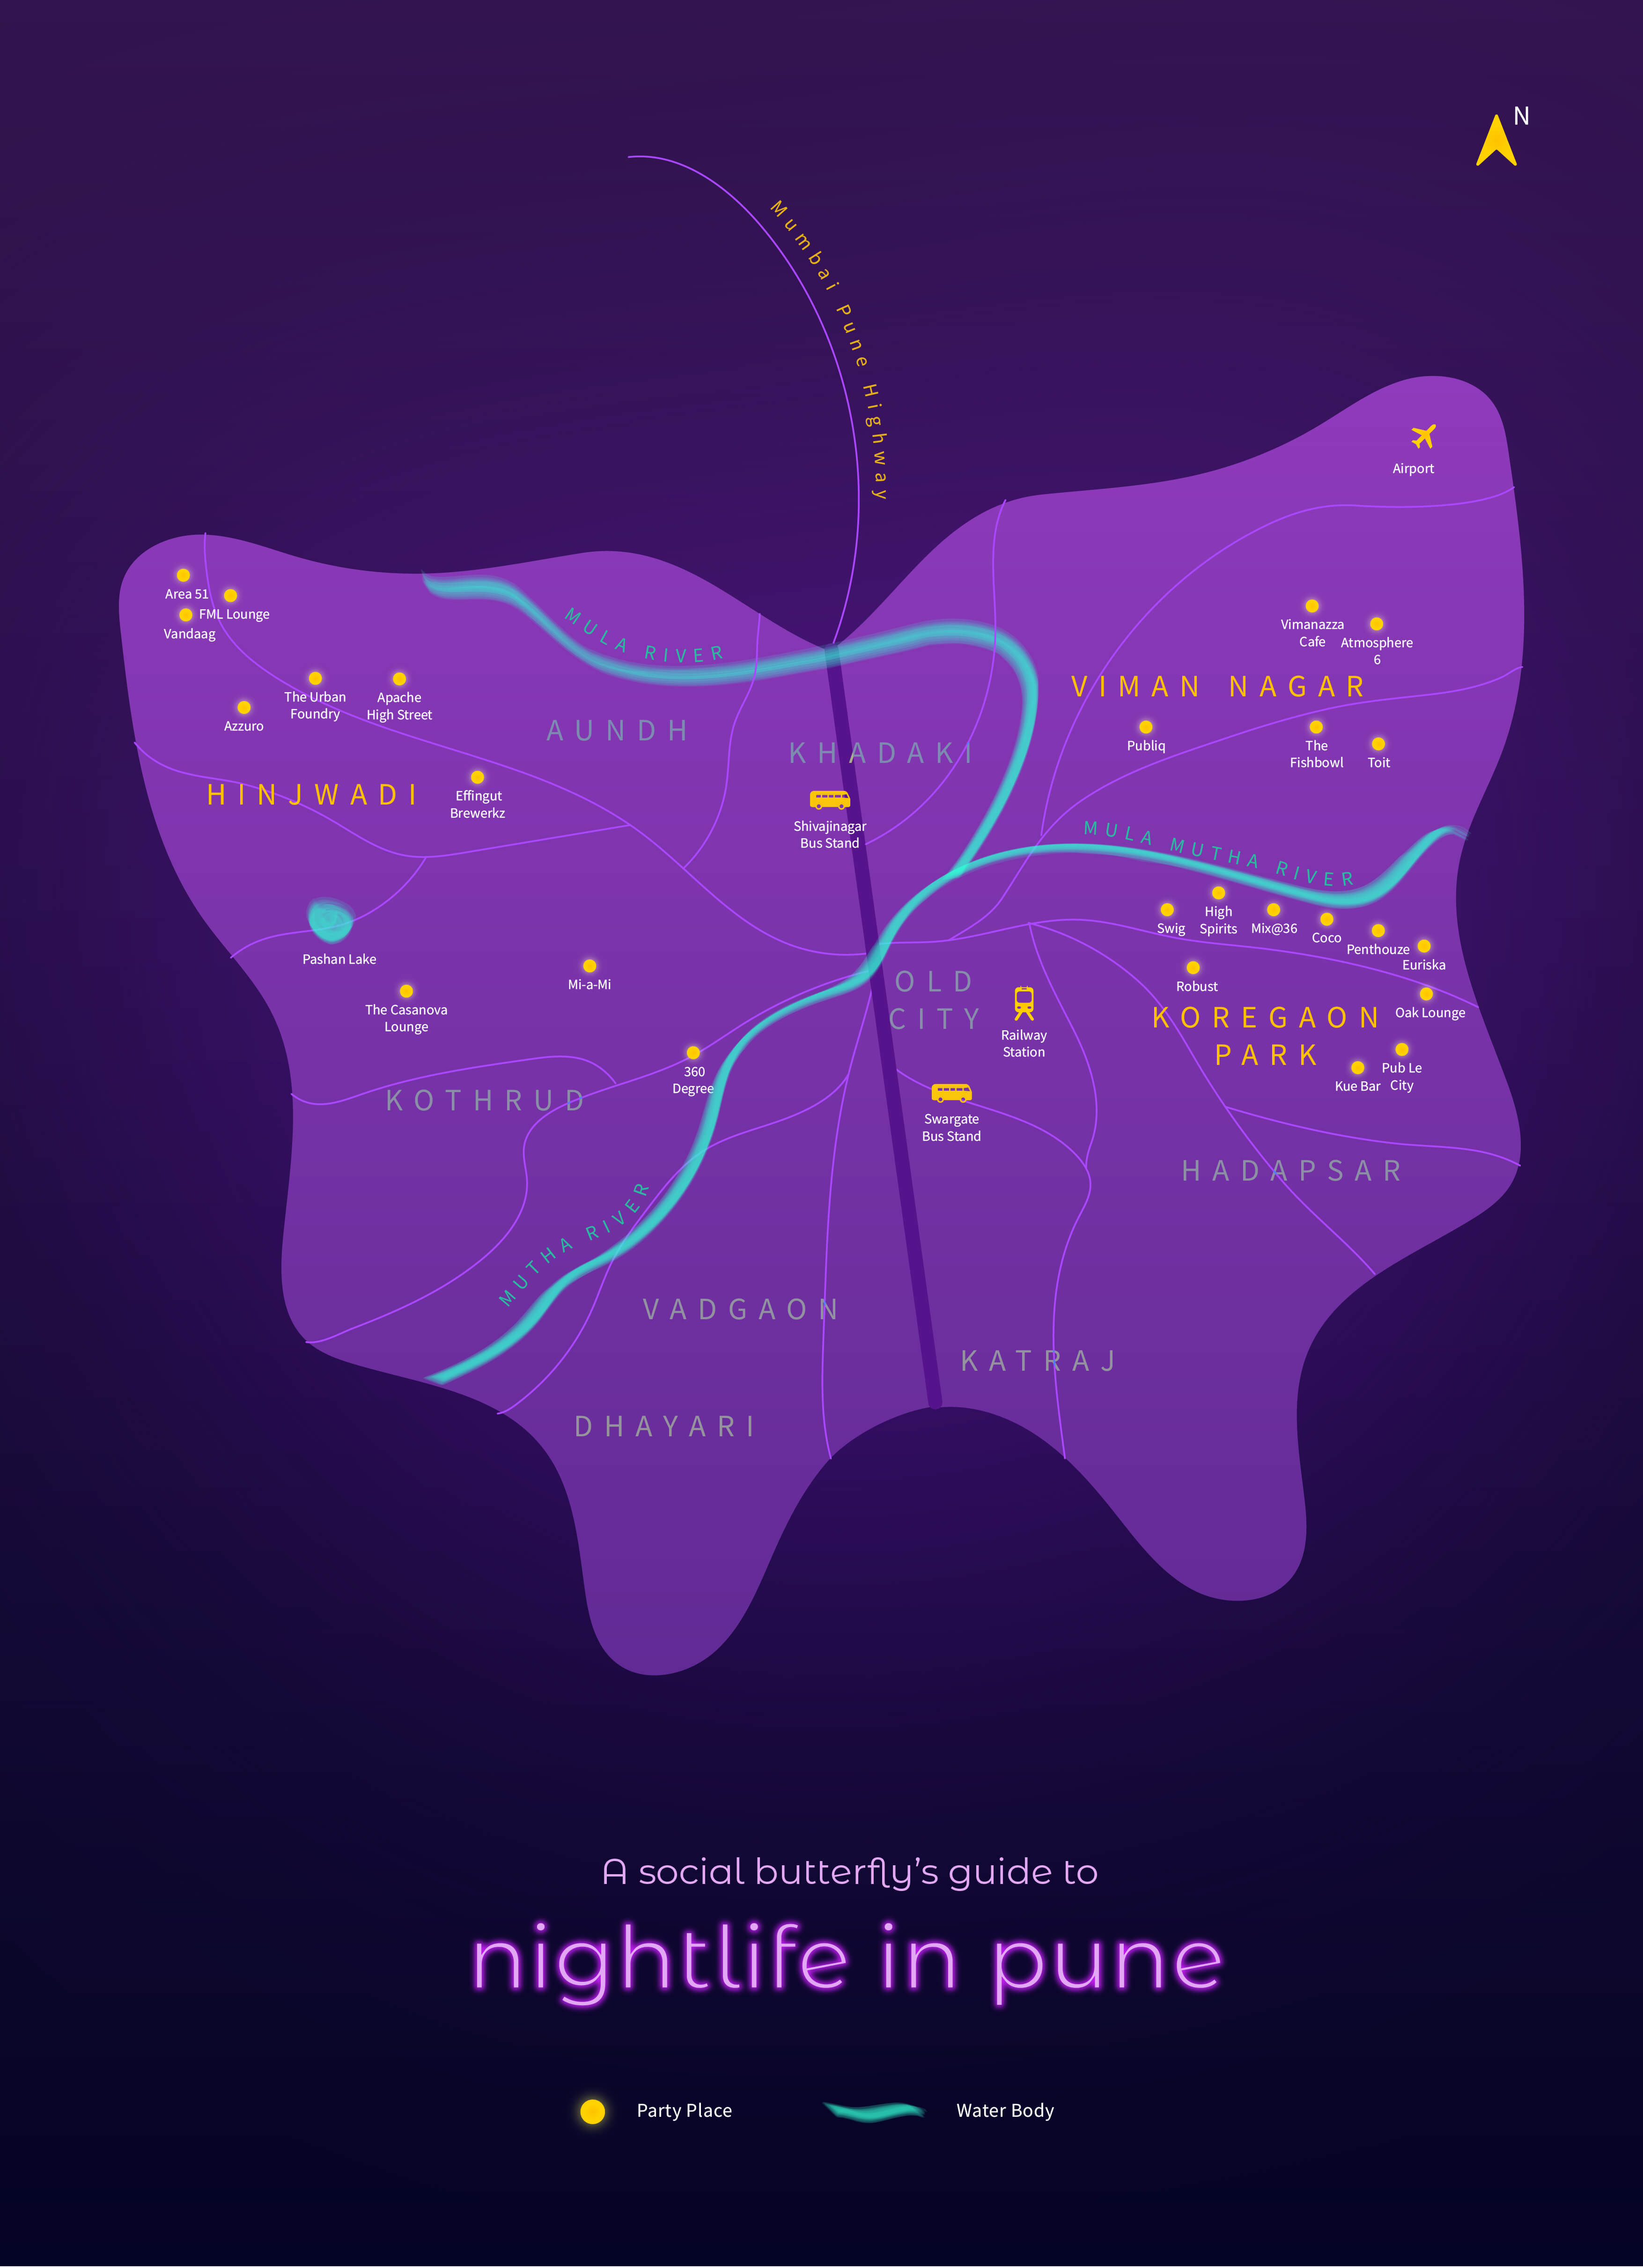 Final Schematic map of Pune by Tanaya